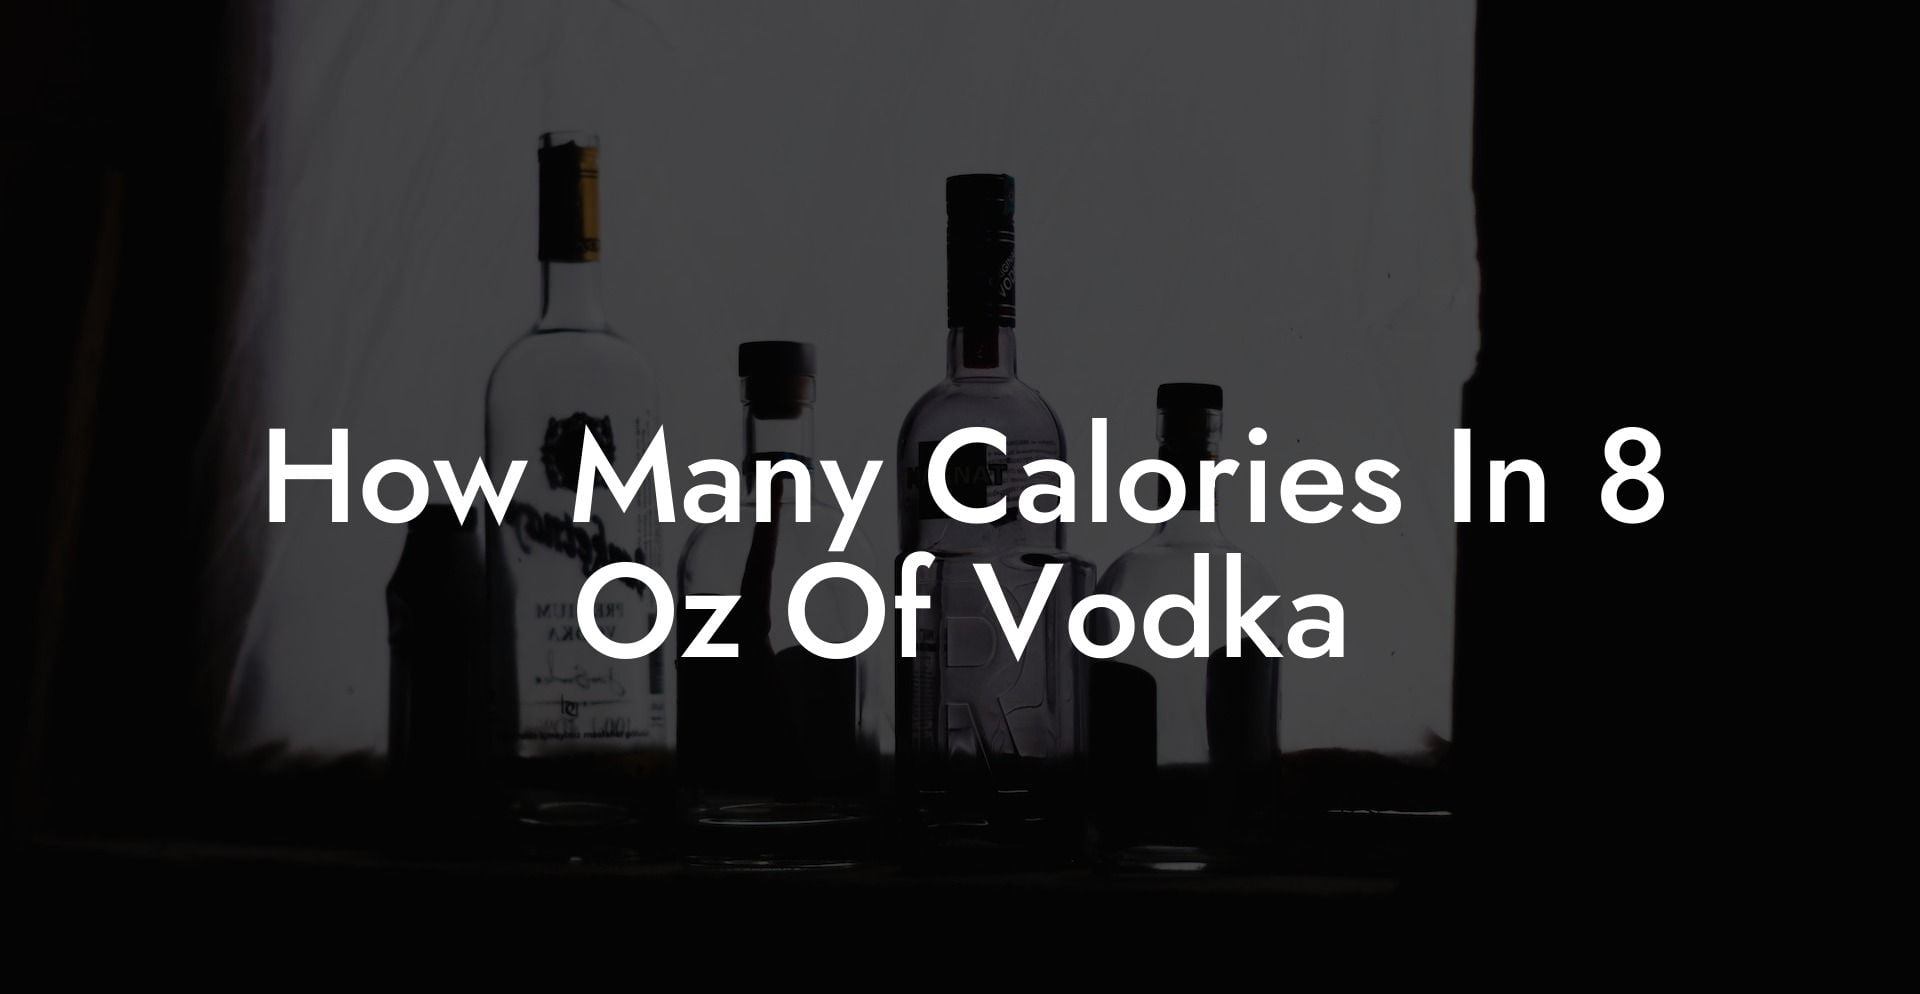 How Many Calories In 8 Oz Of Vodka